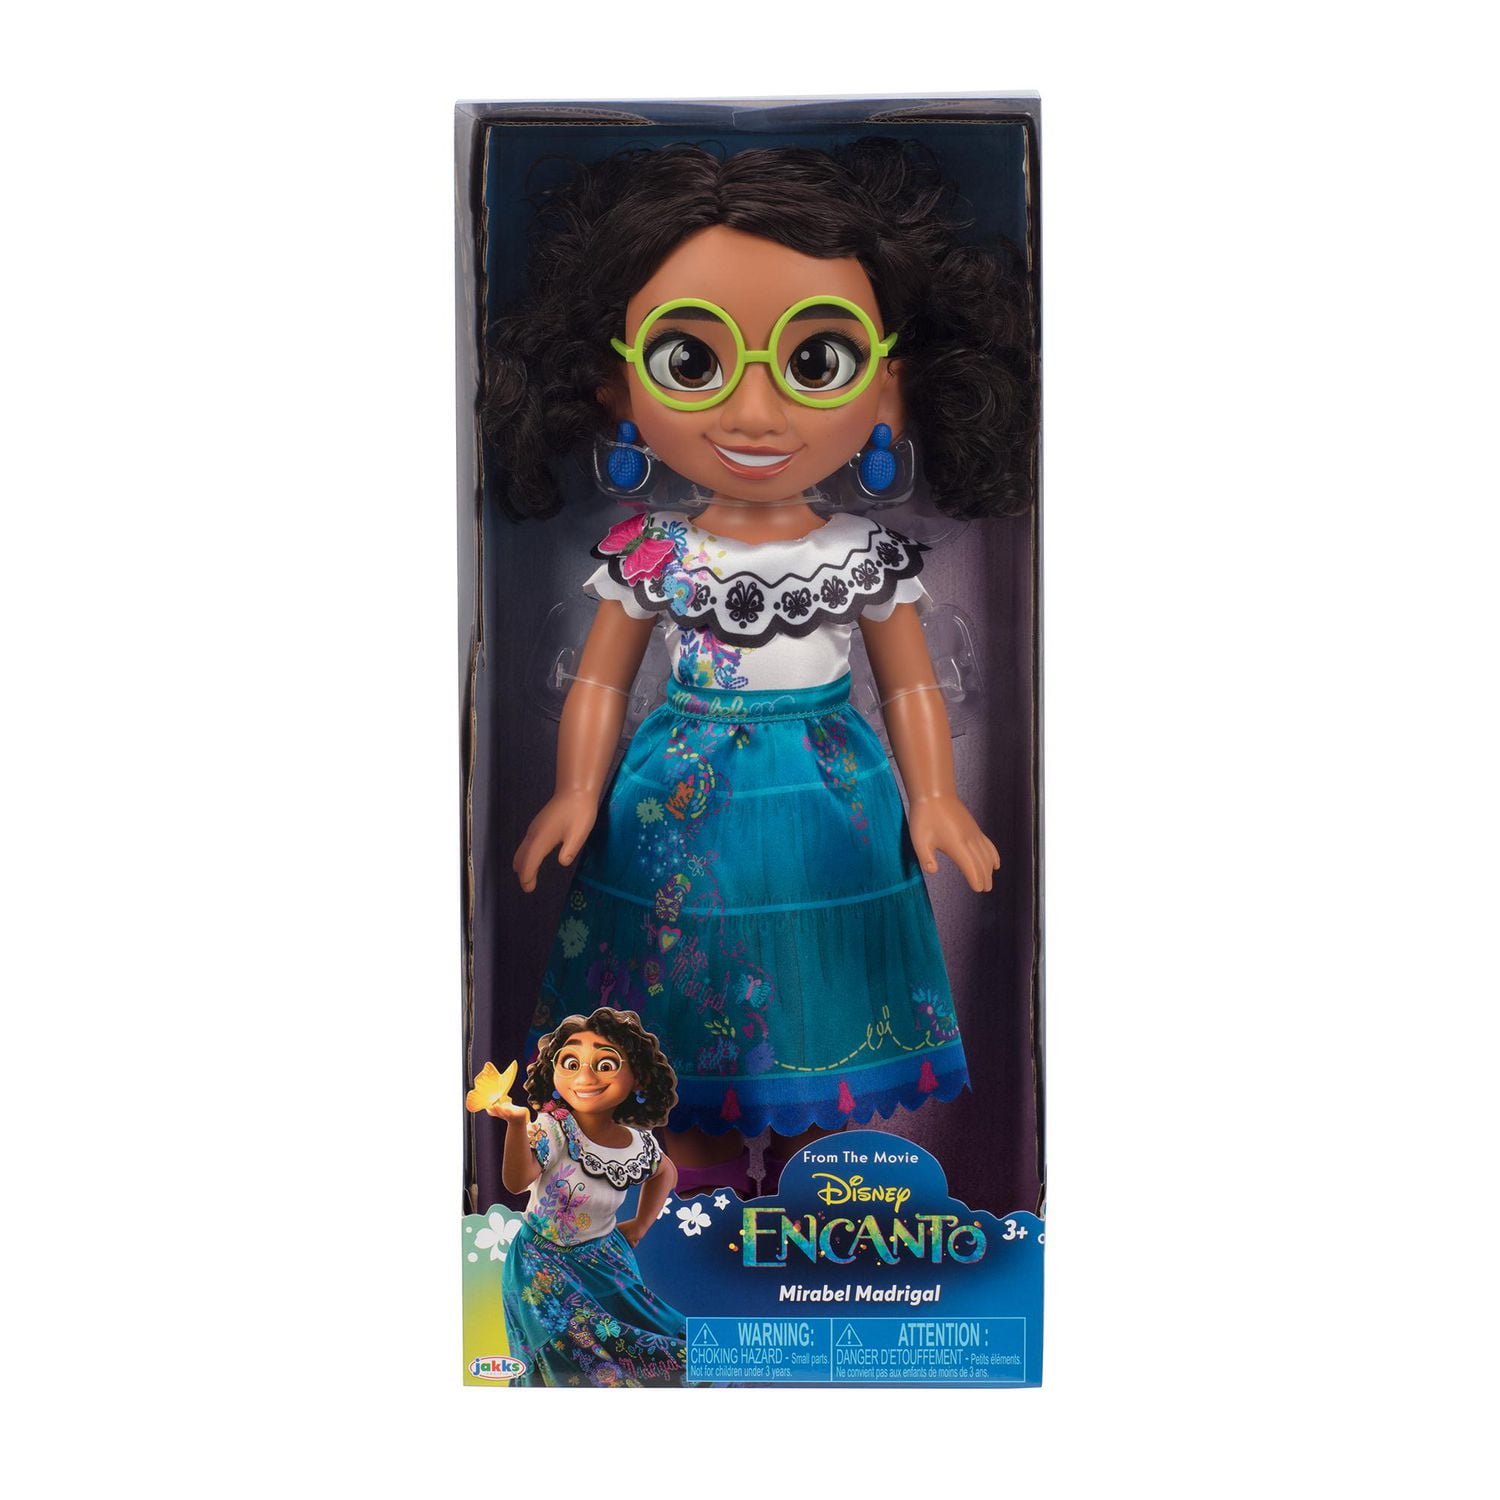 Disney Encanto Mirabel 11 inch Fashion Doll Includes Dress, Shoes and Clip,  for Children Ages 3+